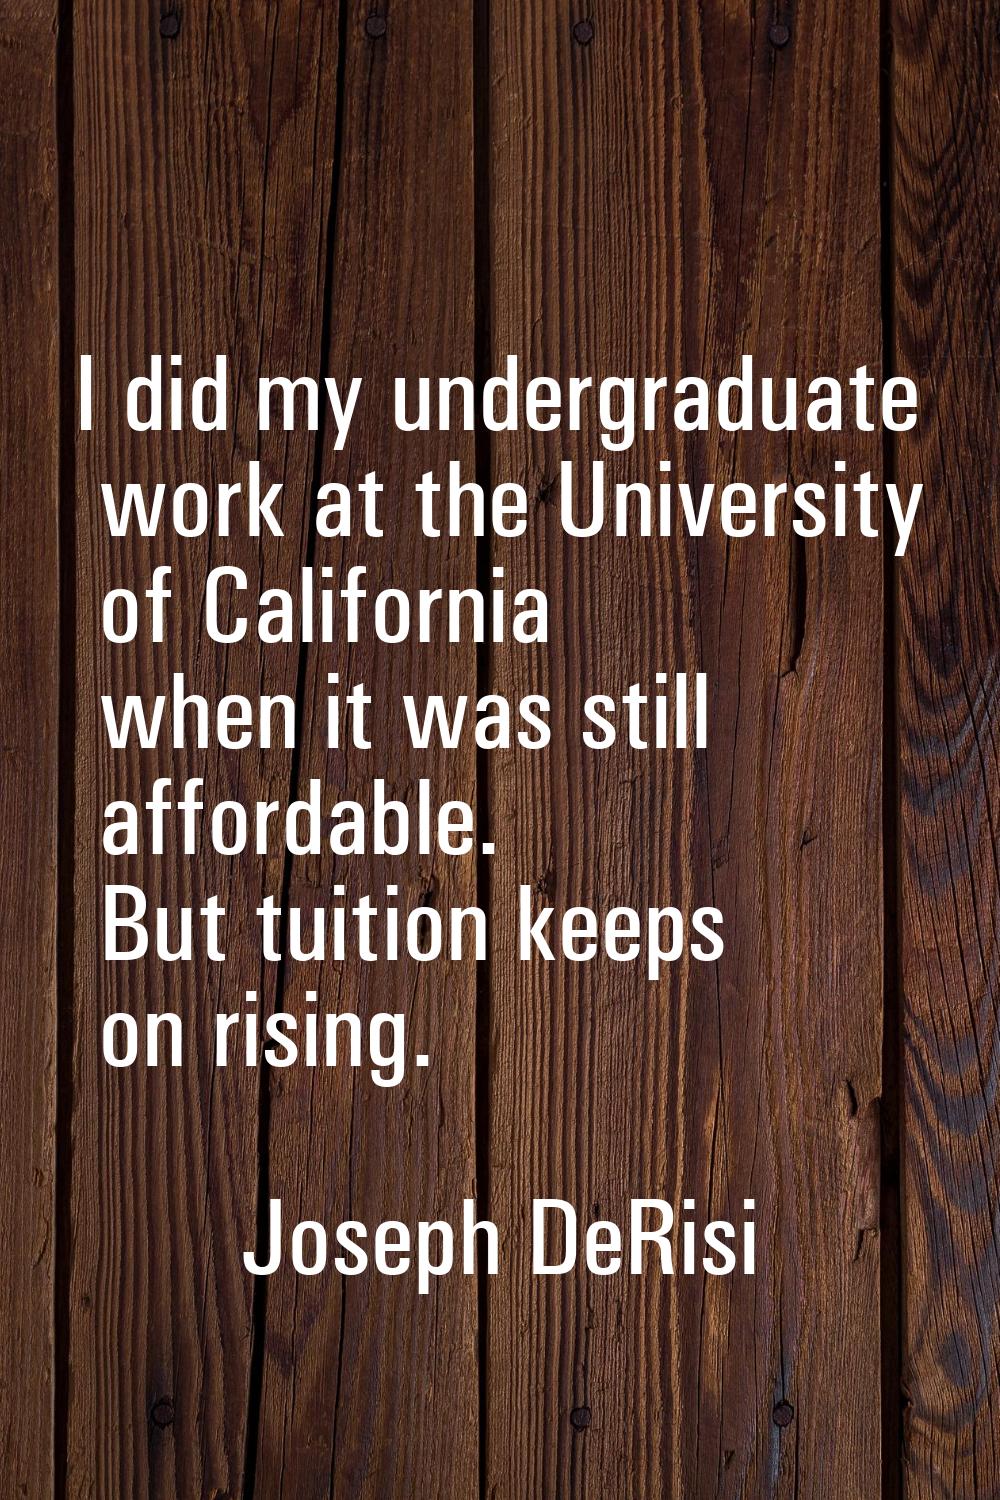 I did my undergraduate work at the University of California when it was still affordable. But tuiti